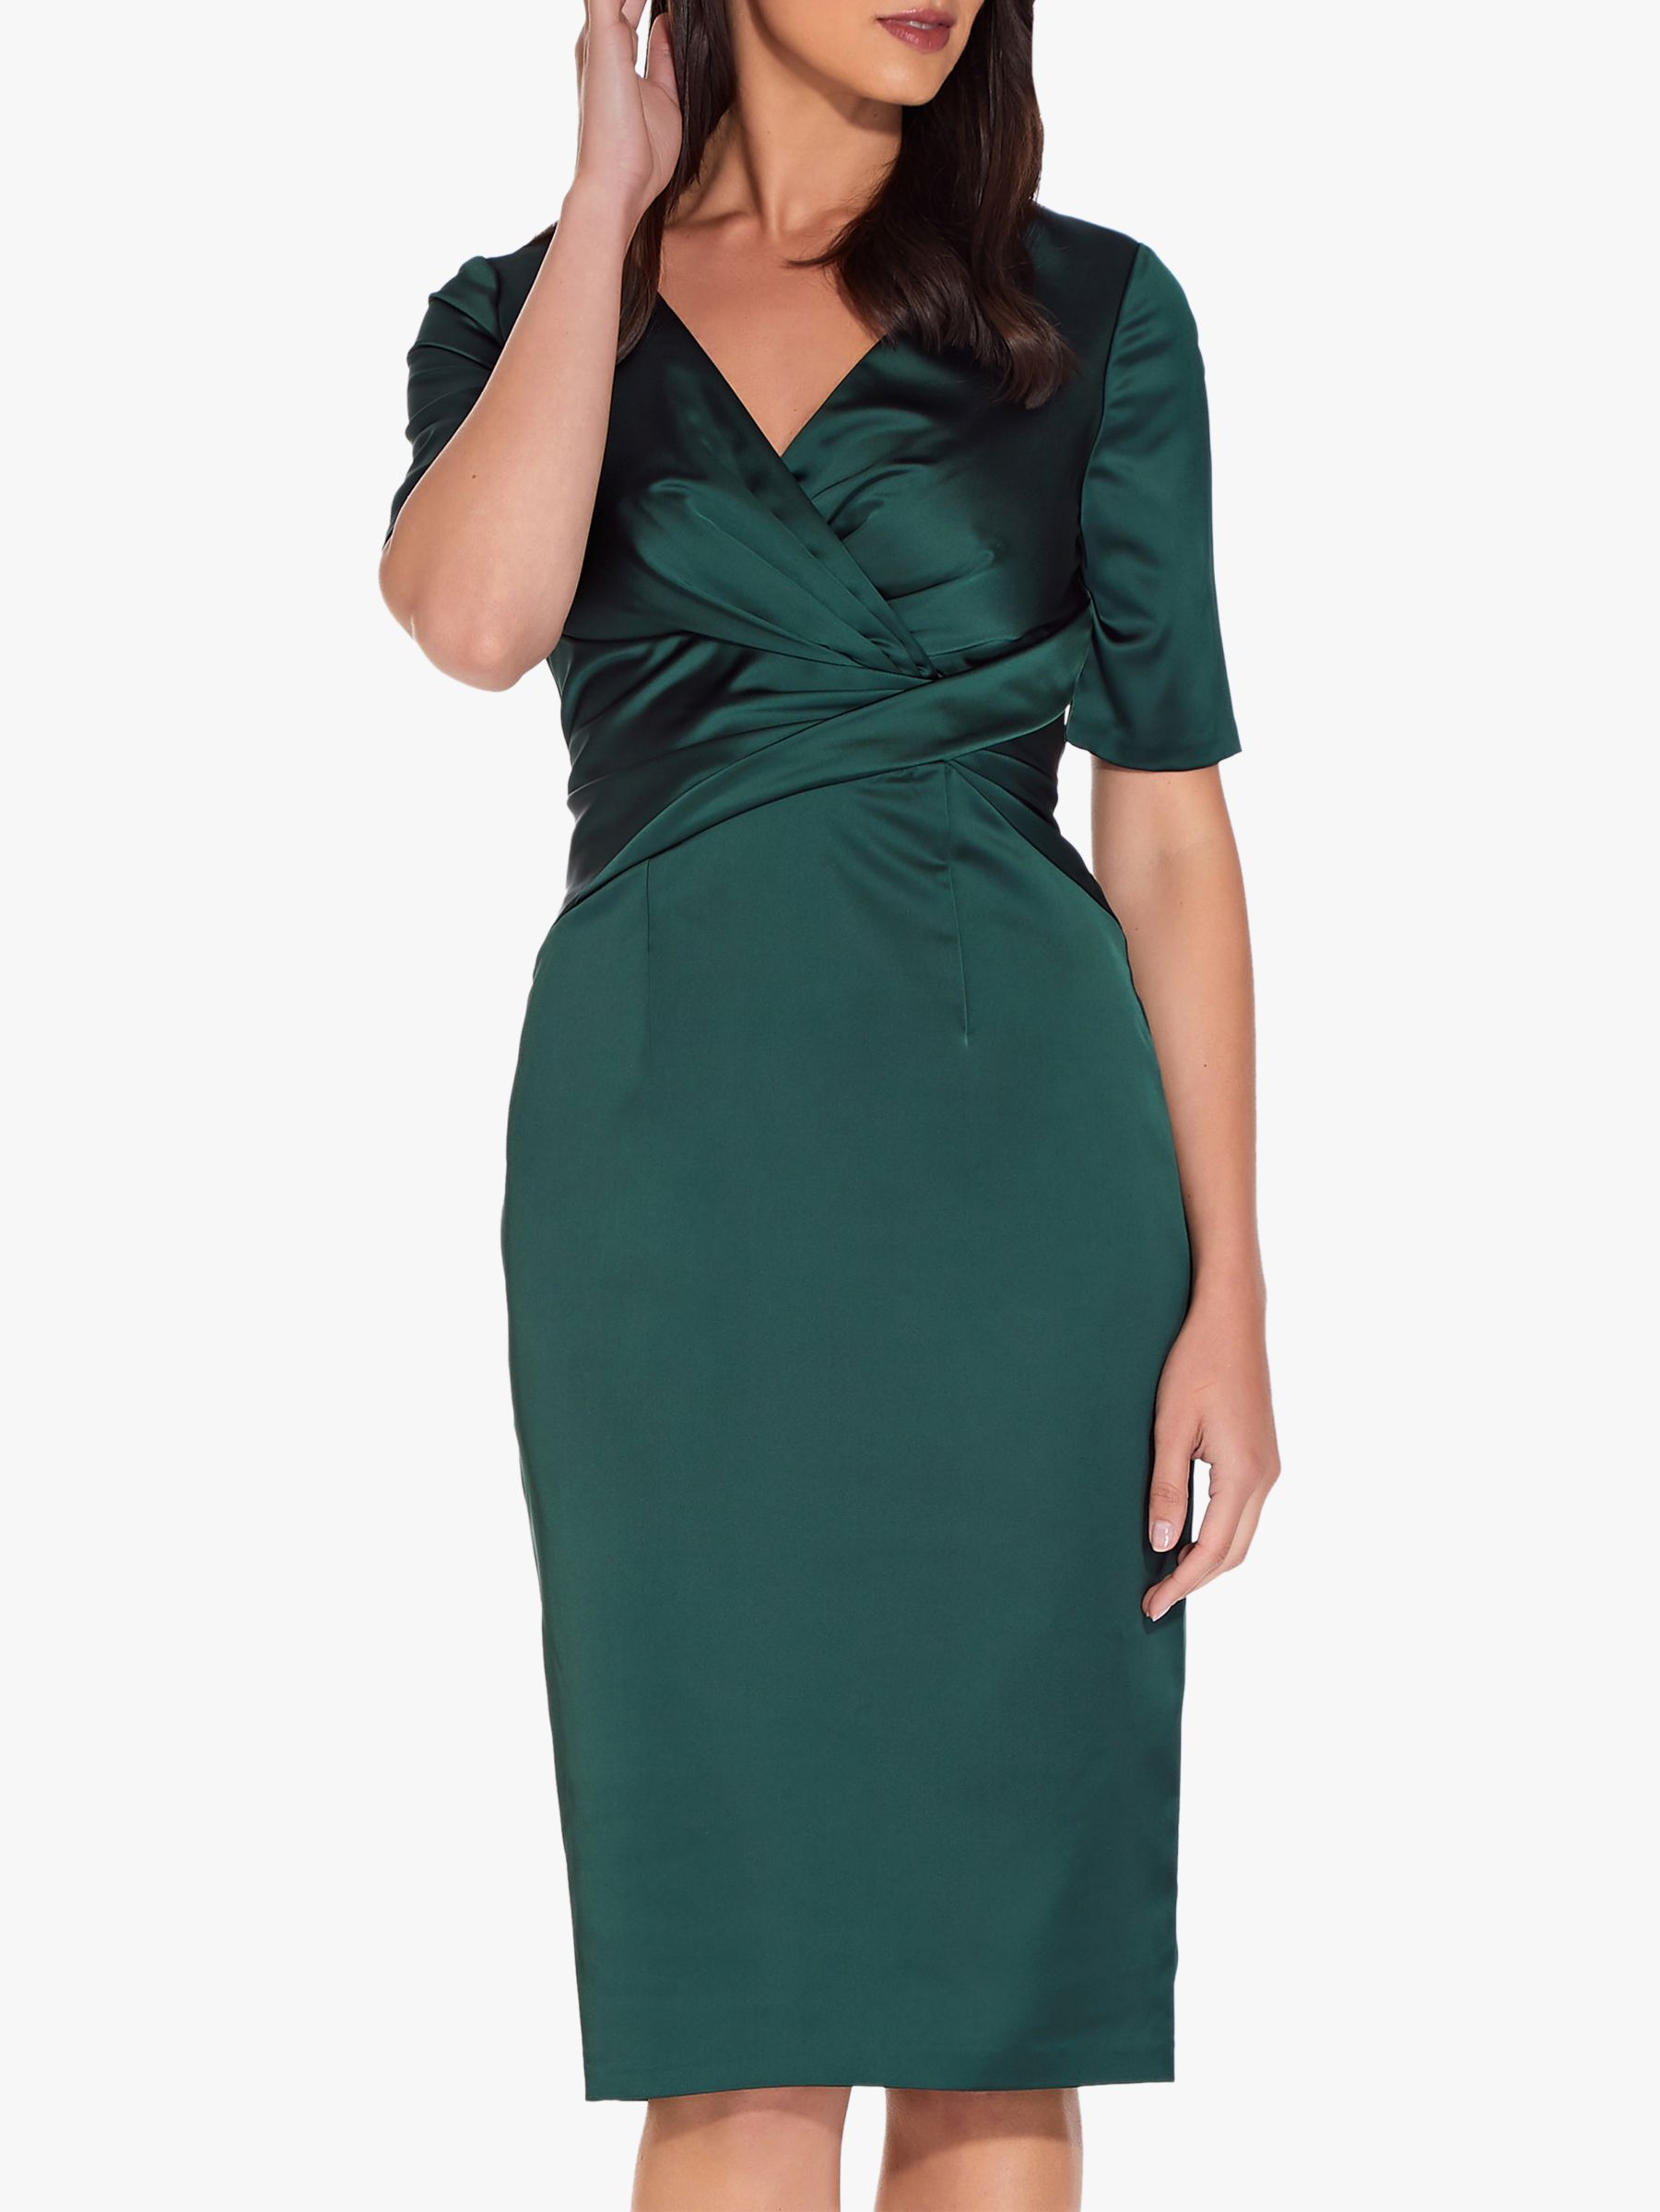 Adrianna Papell Satin Wrap Cocktail Dress, Forest Green